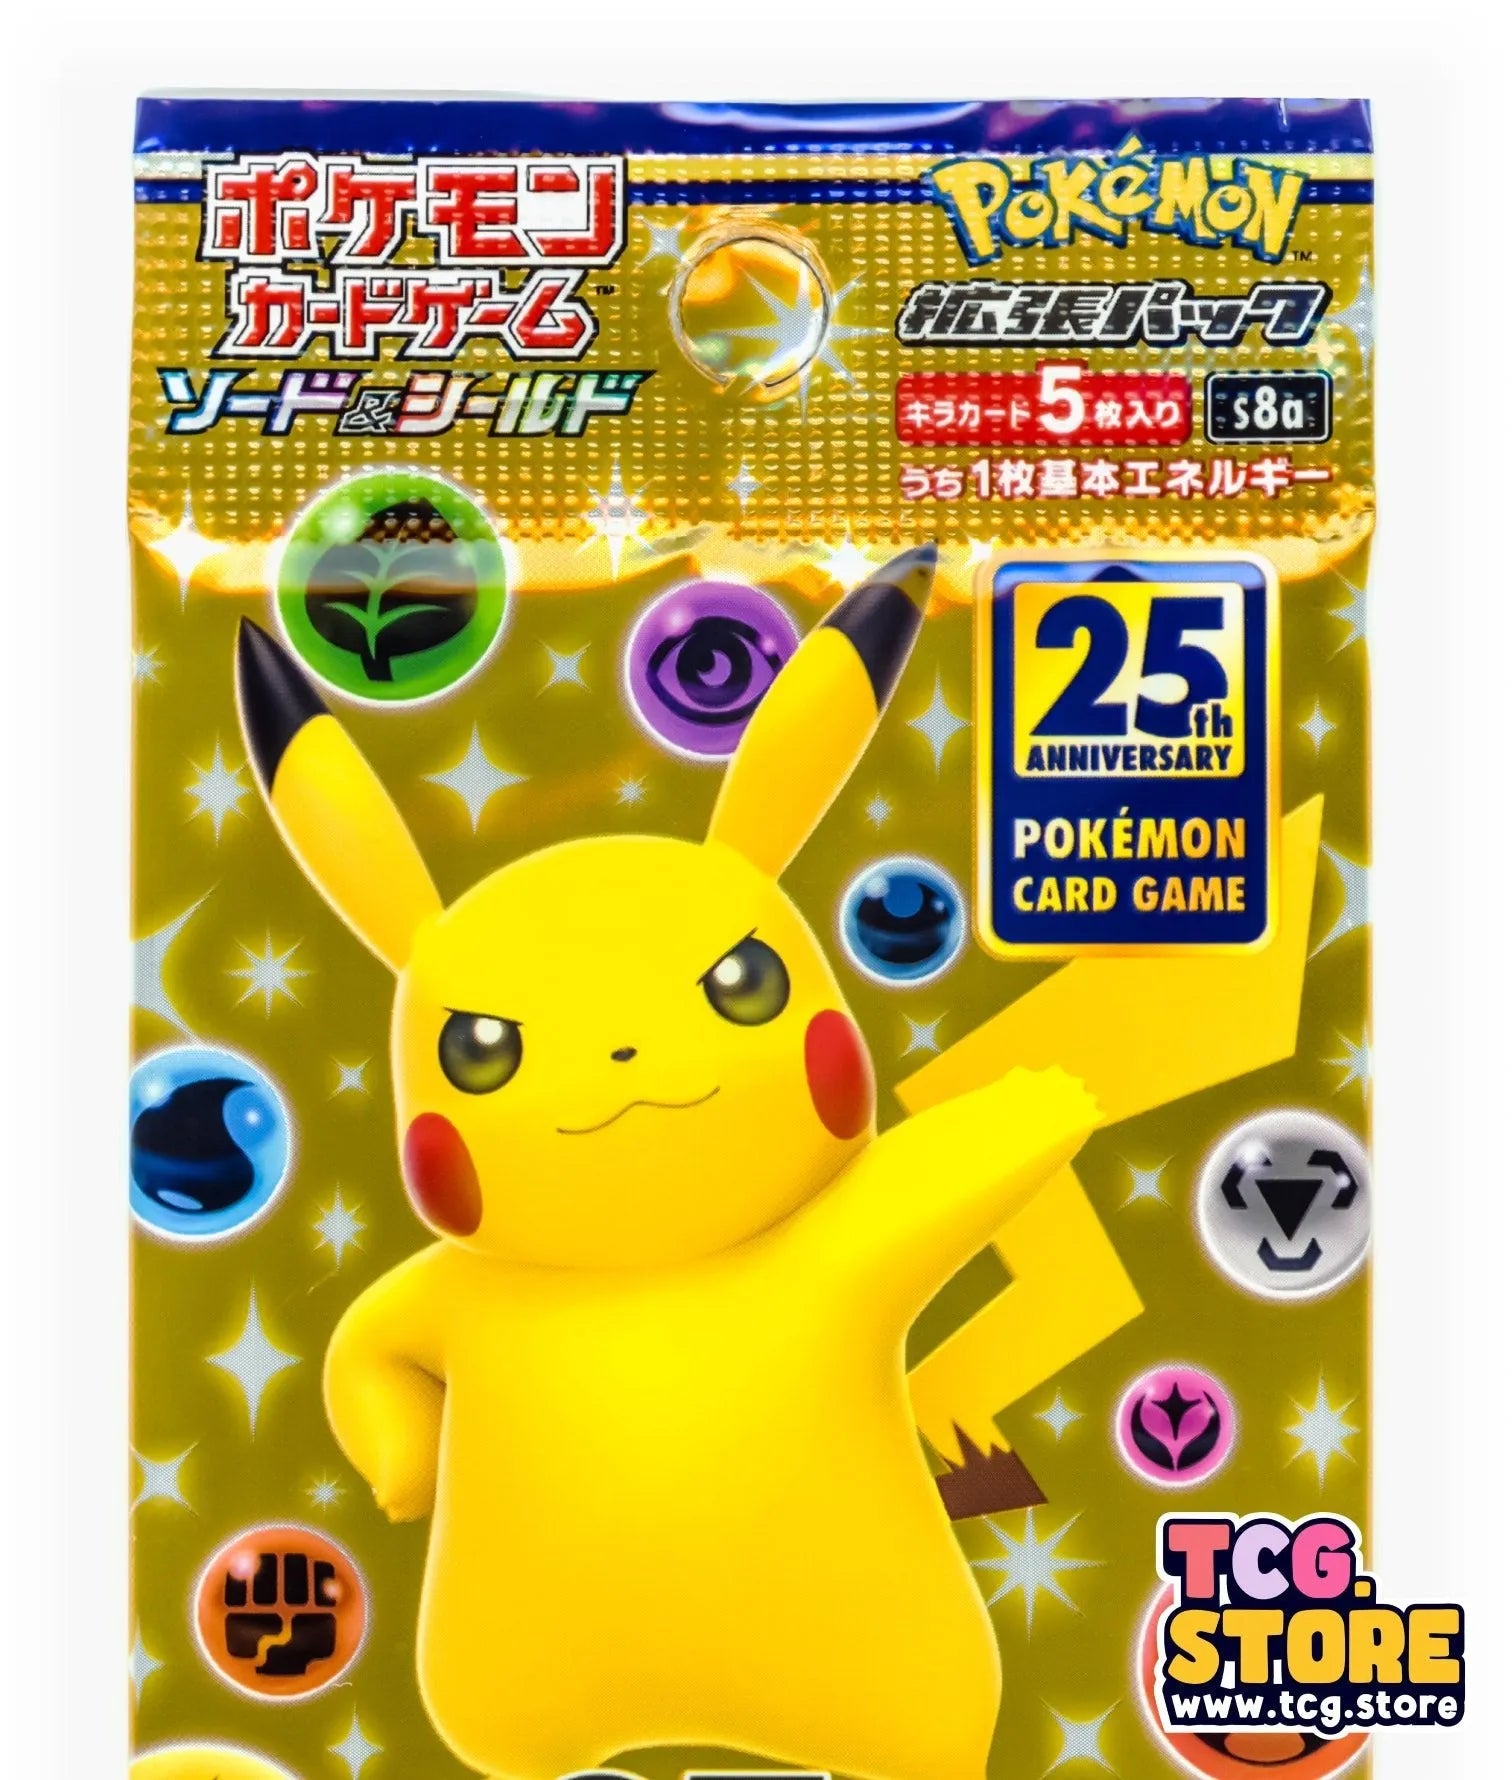 1 Pack - Pokemon 25th Anniversary S8A (5 cards) - Japanese - Sealed - TCG.Store